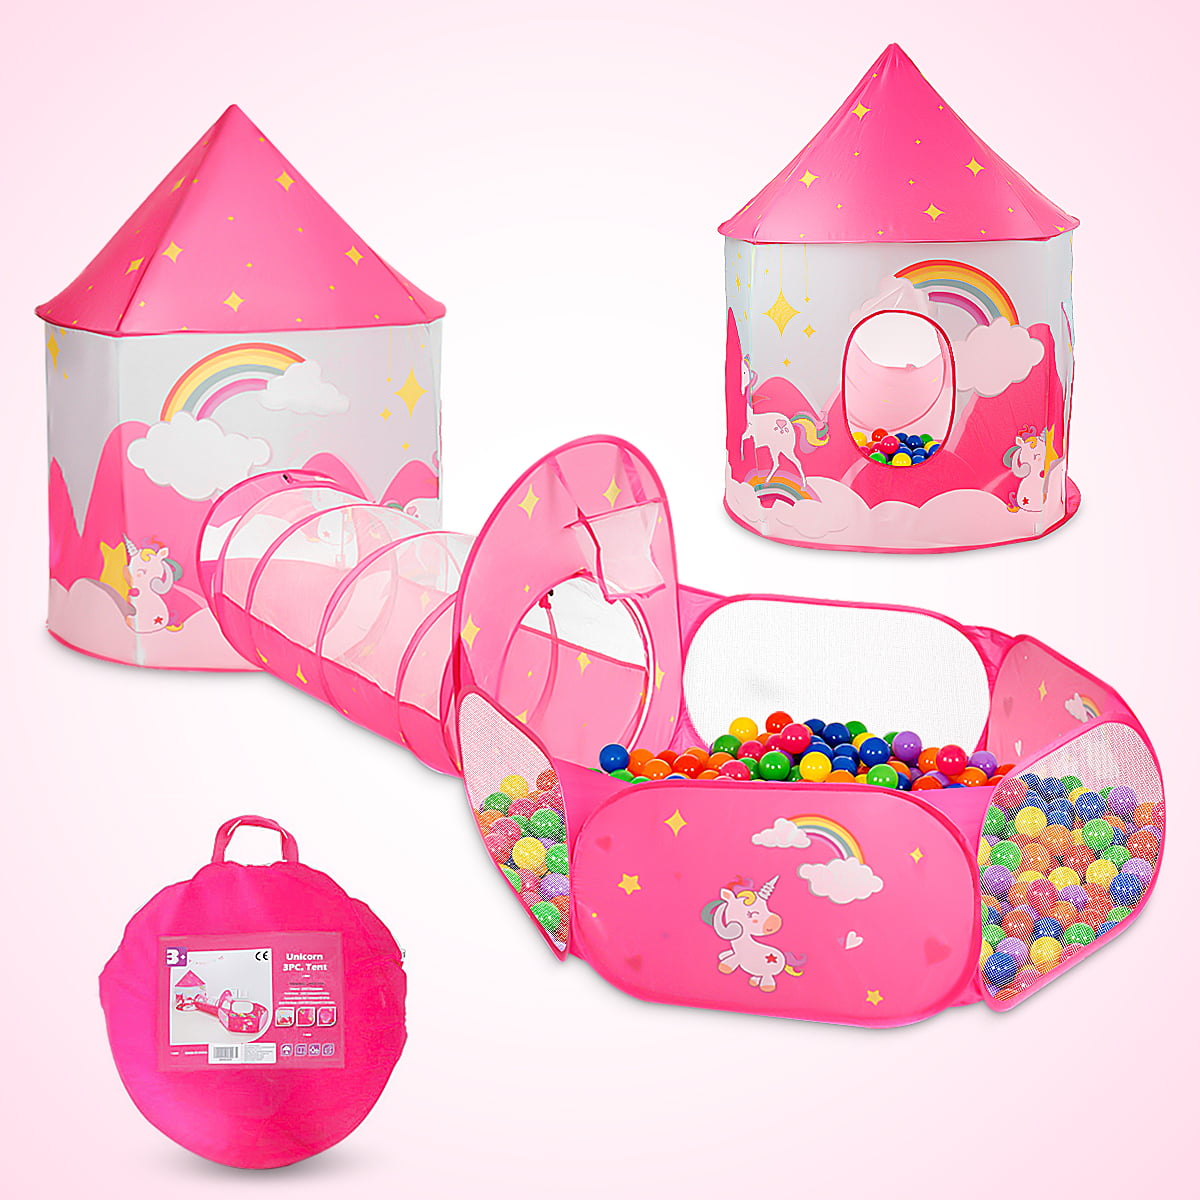 Kids Pop Up Play Tent and Tunnel Set-Foldable Pop up Kids Toddler Play Tent Tunnel for Boys Girls Indoor Outdoor Use-Zippered Storage Bag 